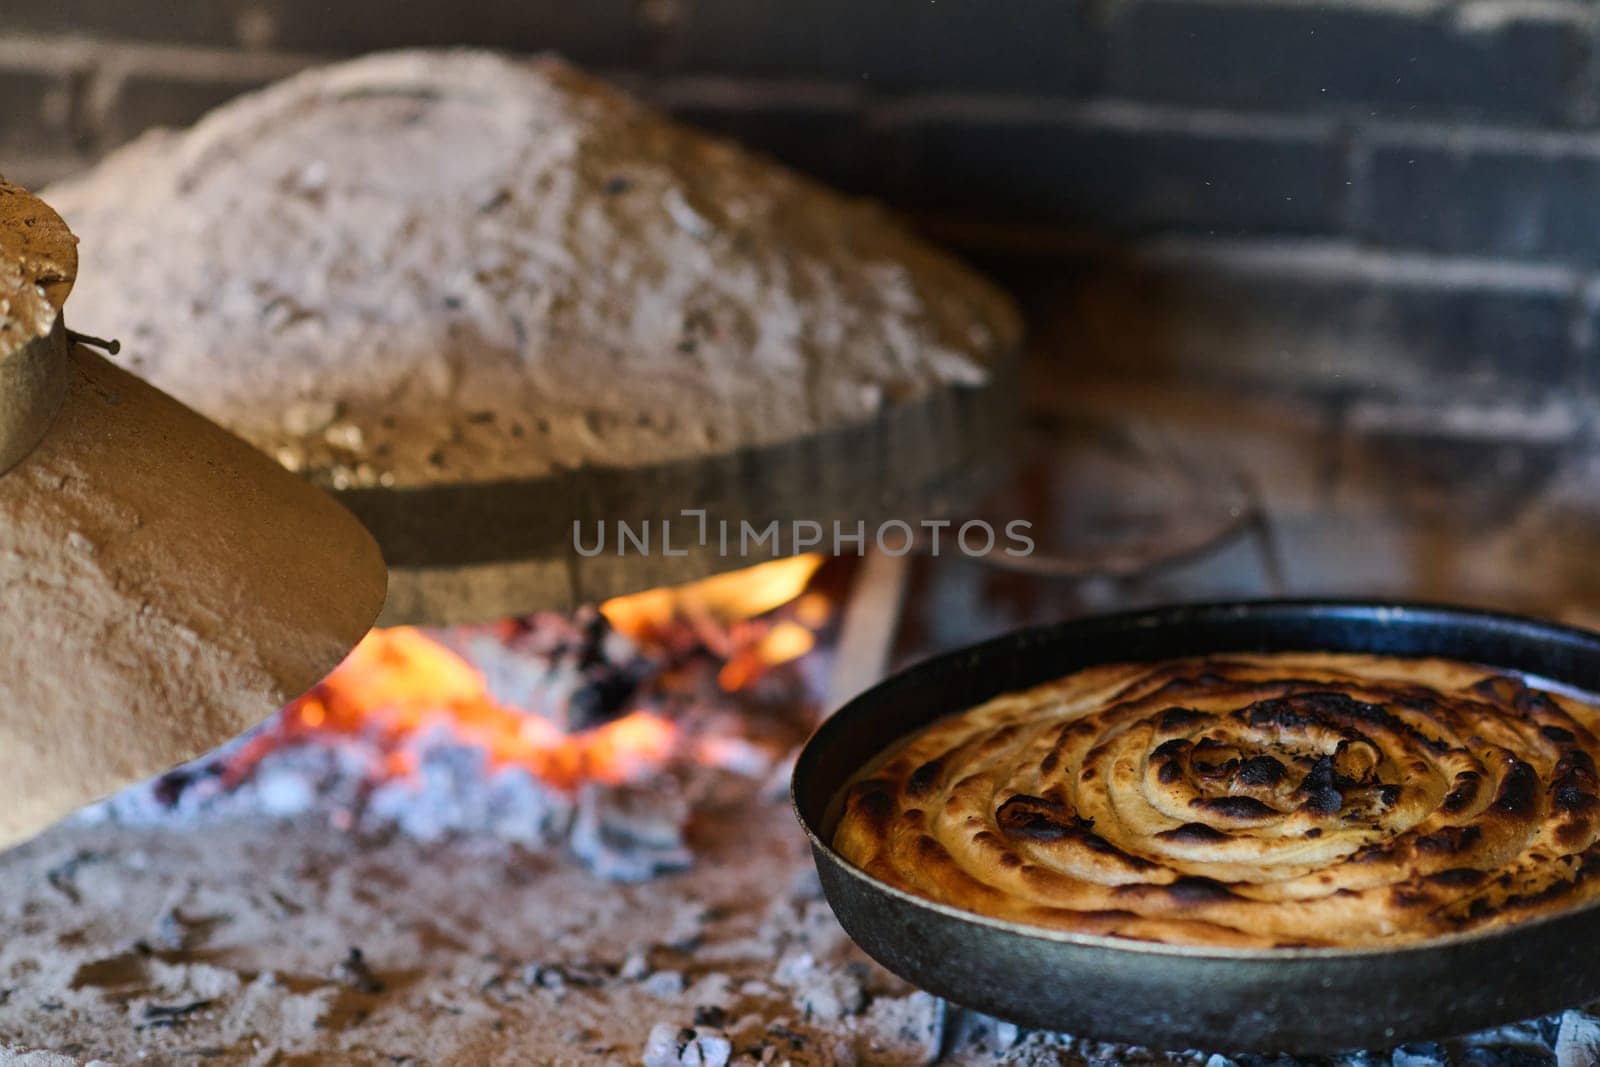 Capturing the essence of Bosnian culinary tradition, step-by-step preparation of a traditional Bosnian pie, showcasing the meticulous craftsmanship and authentic flavors involved in the culinary journey.